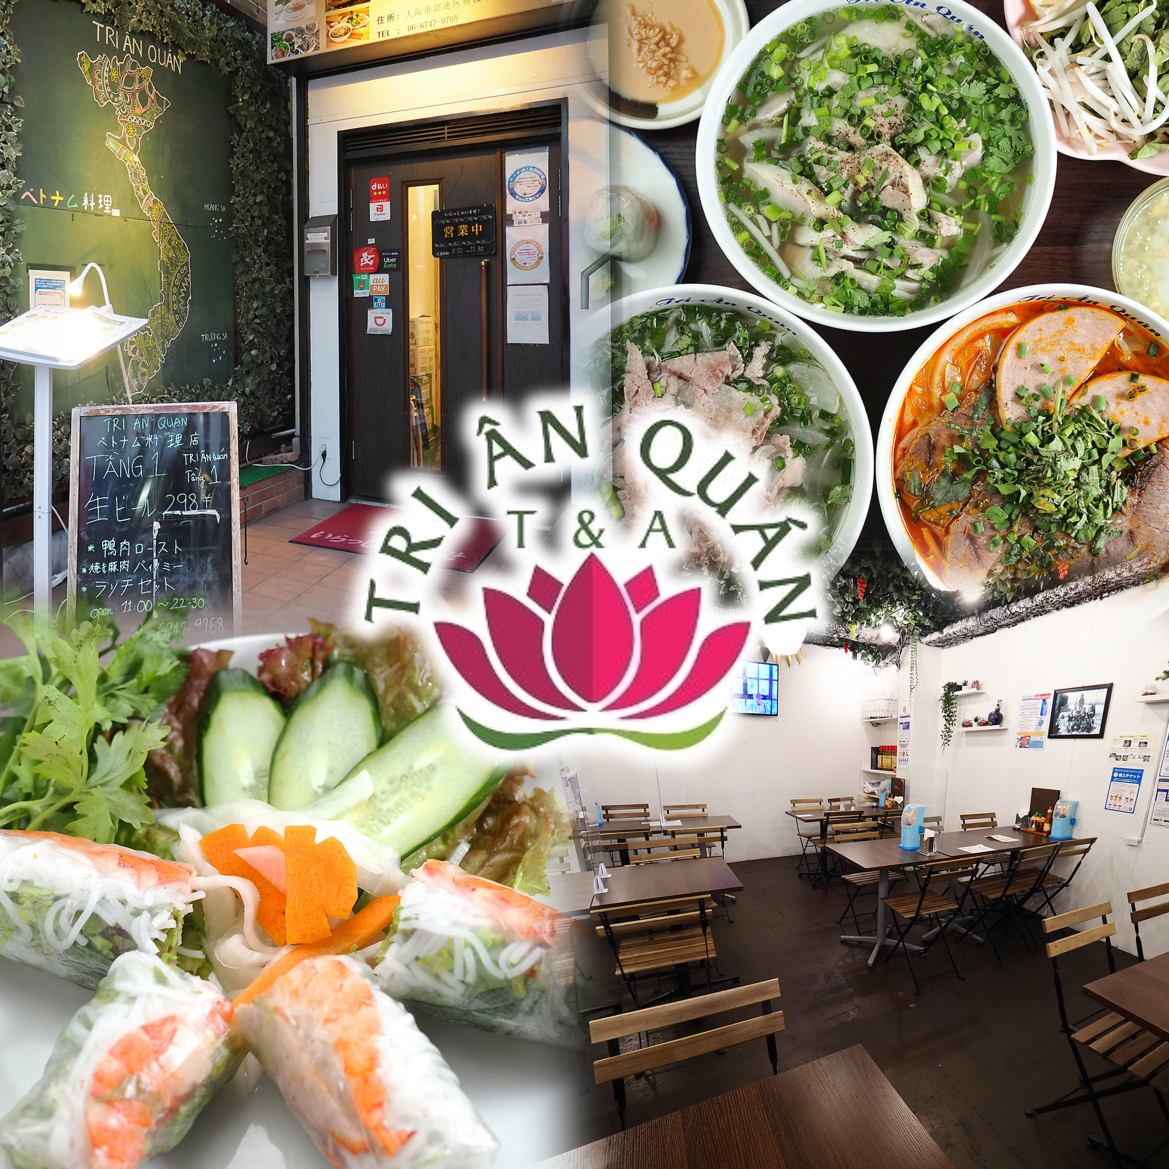 You can enjoy a wide variety of healthy authentic Vietnamese dishes. Perfect for banquets and girls-only gatherings.